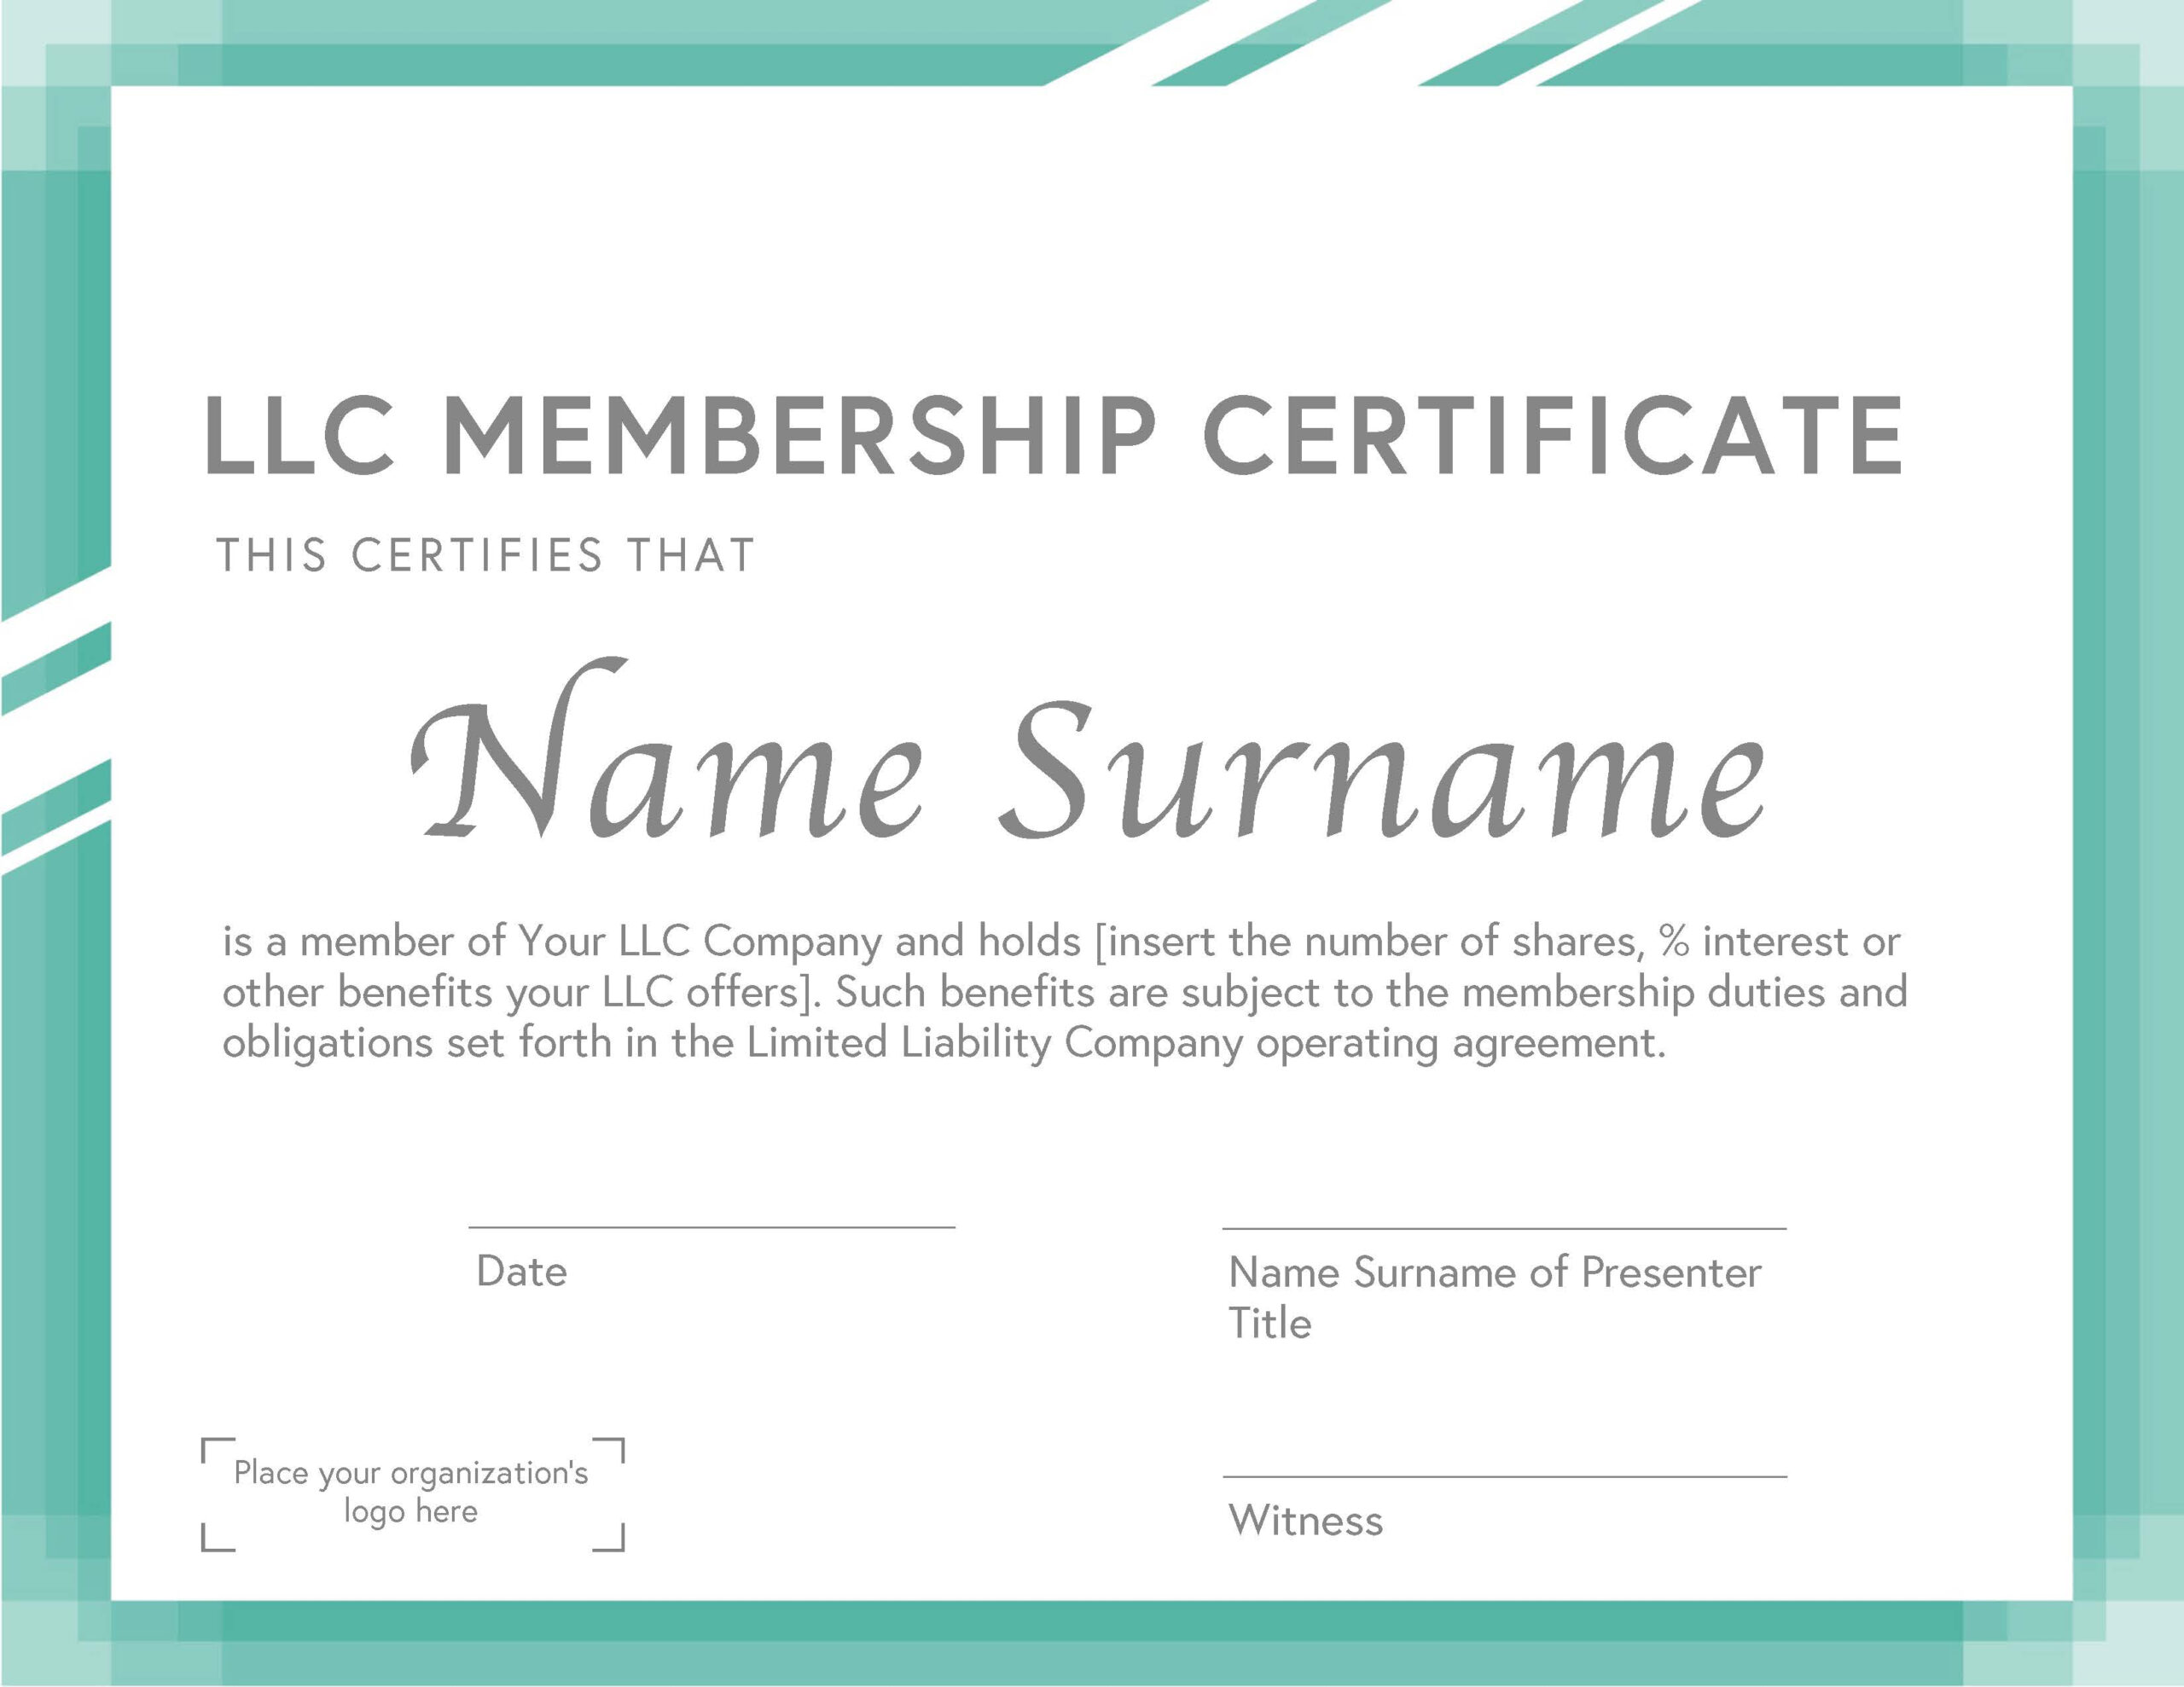 10 Free Membership Certificate Templates for Any Occasion Throughout Llc Membership Certificate Template Word